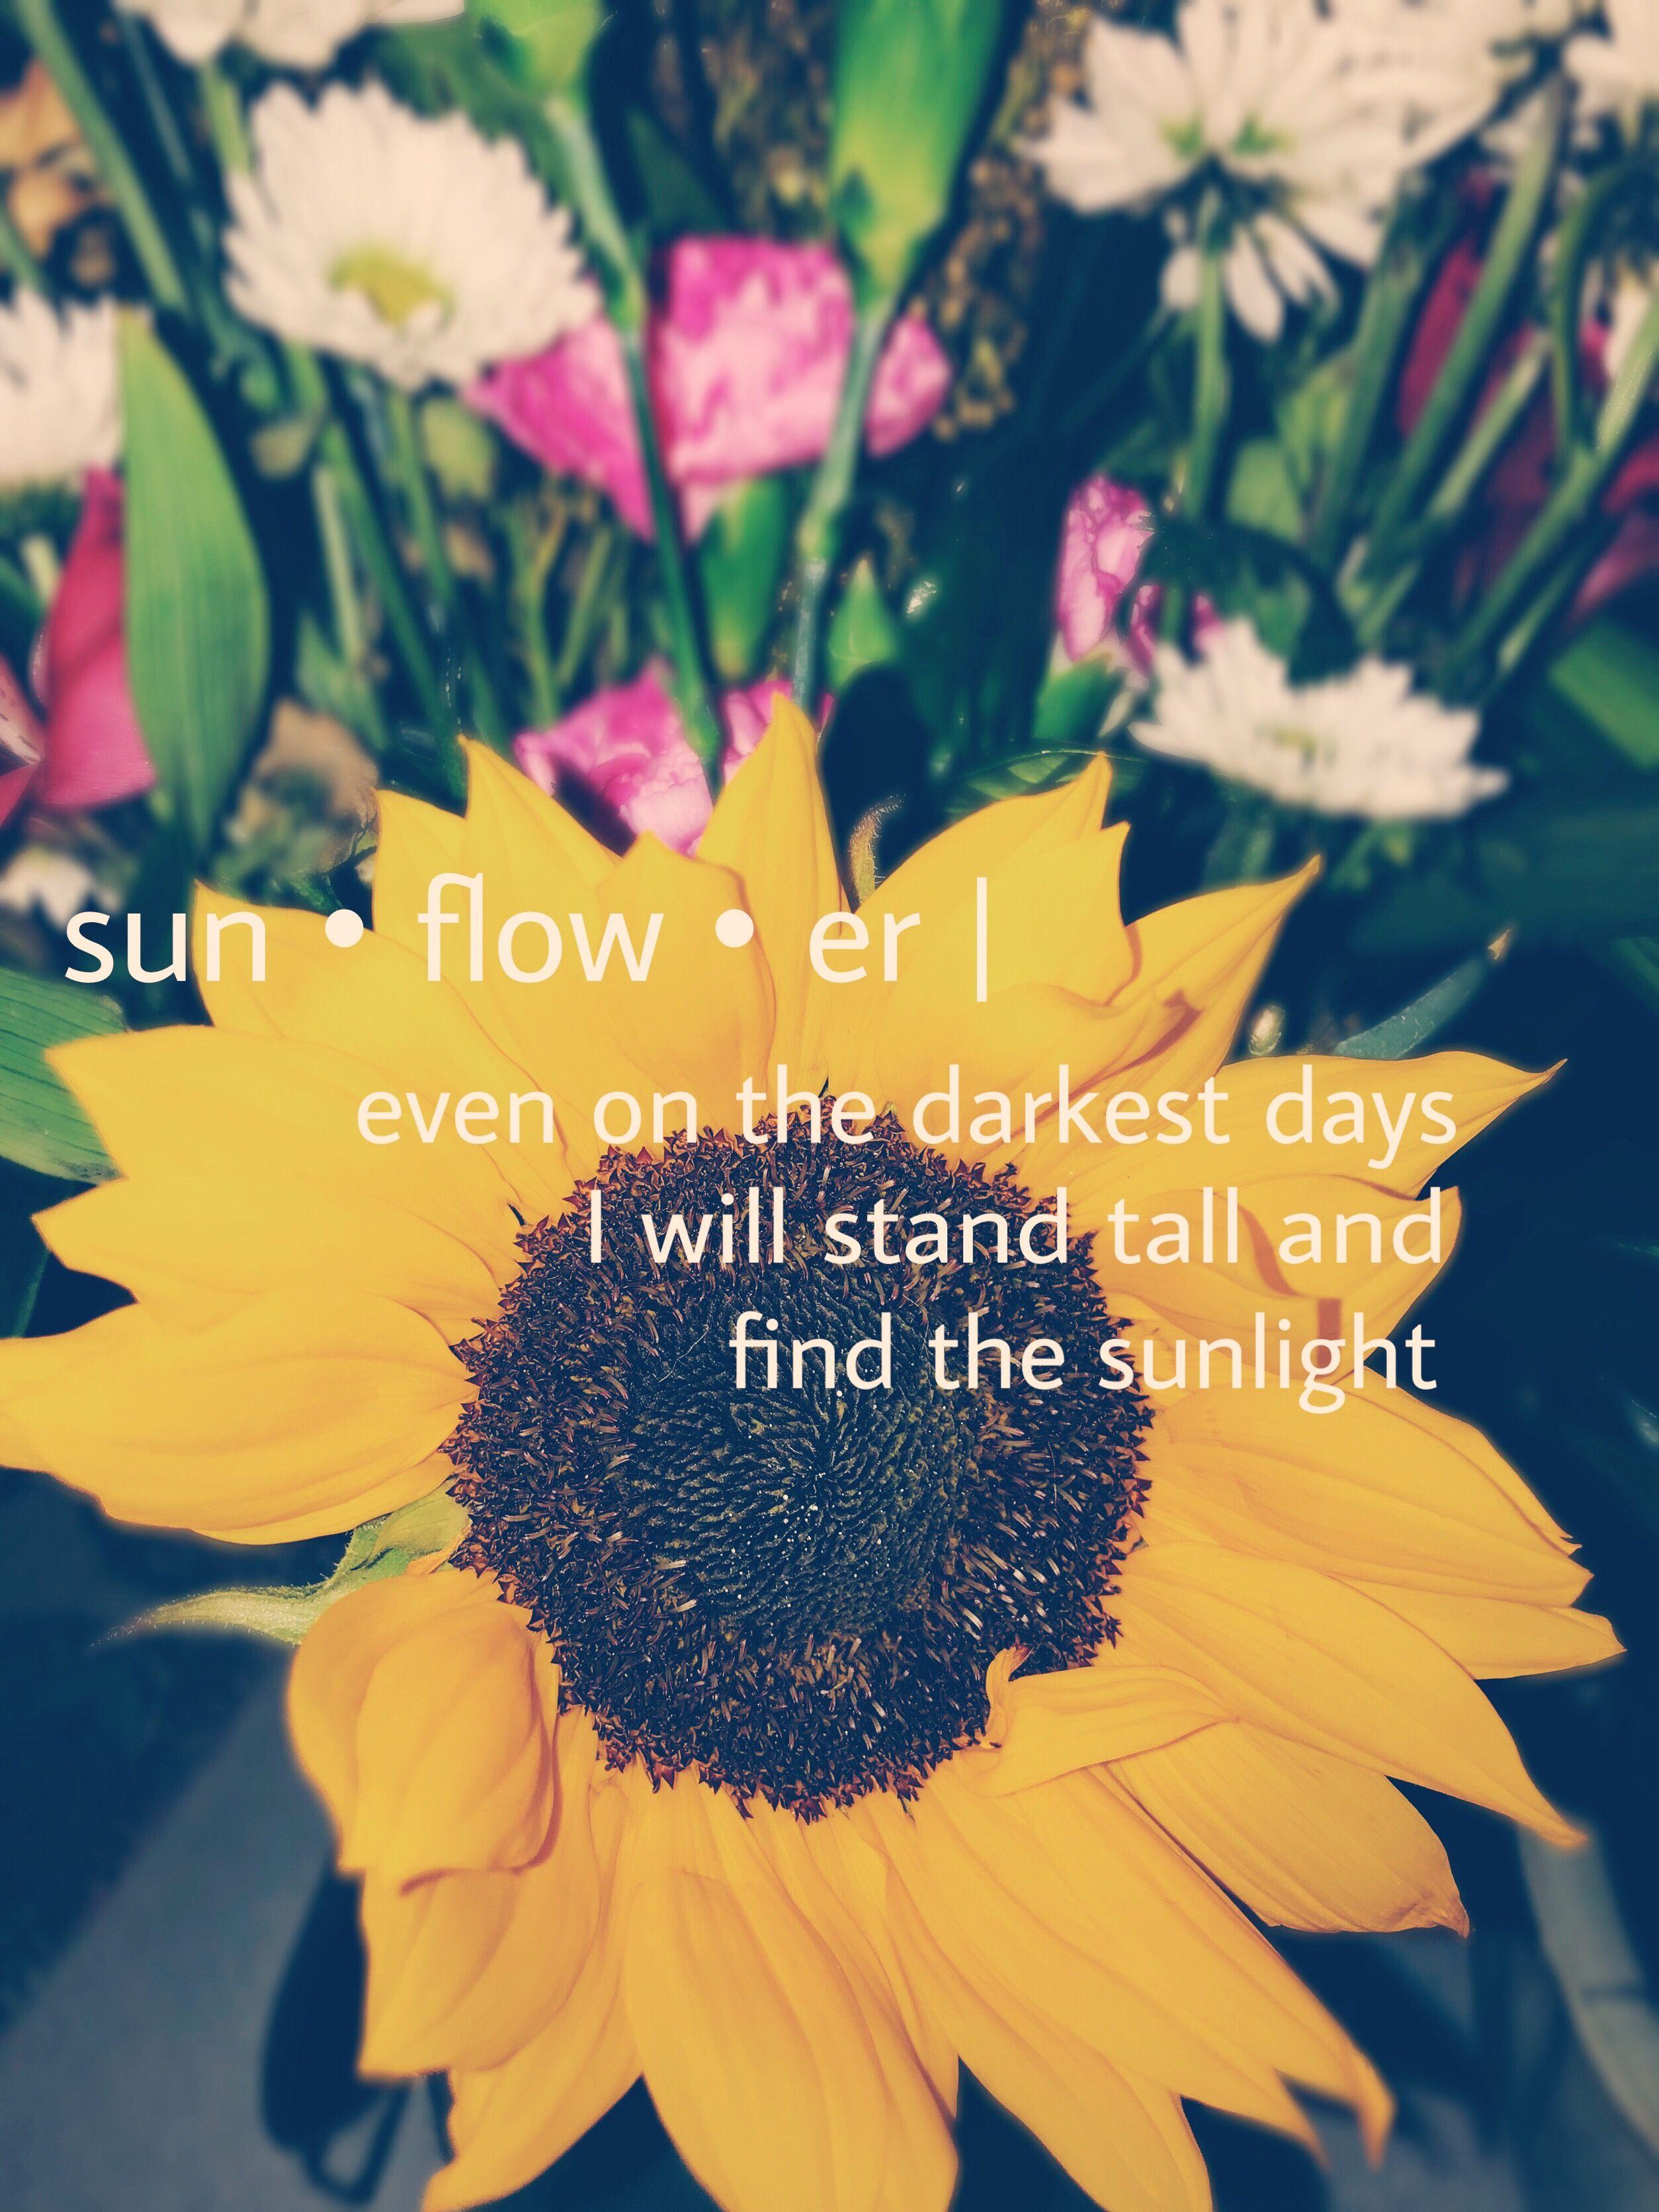 Sunflower Quotes Wallpapers - Top Free Sunflower Quotes Backgrounds